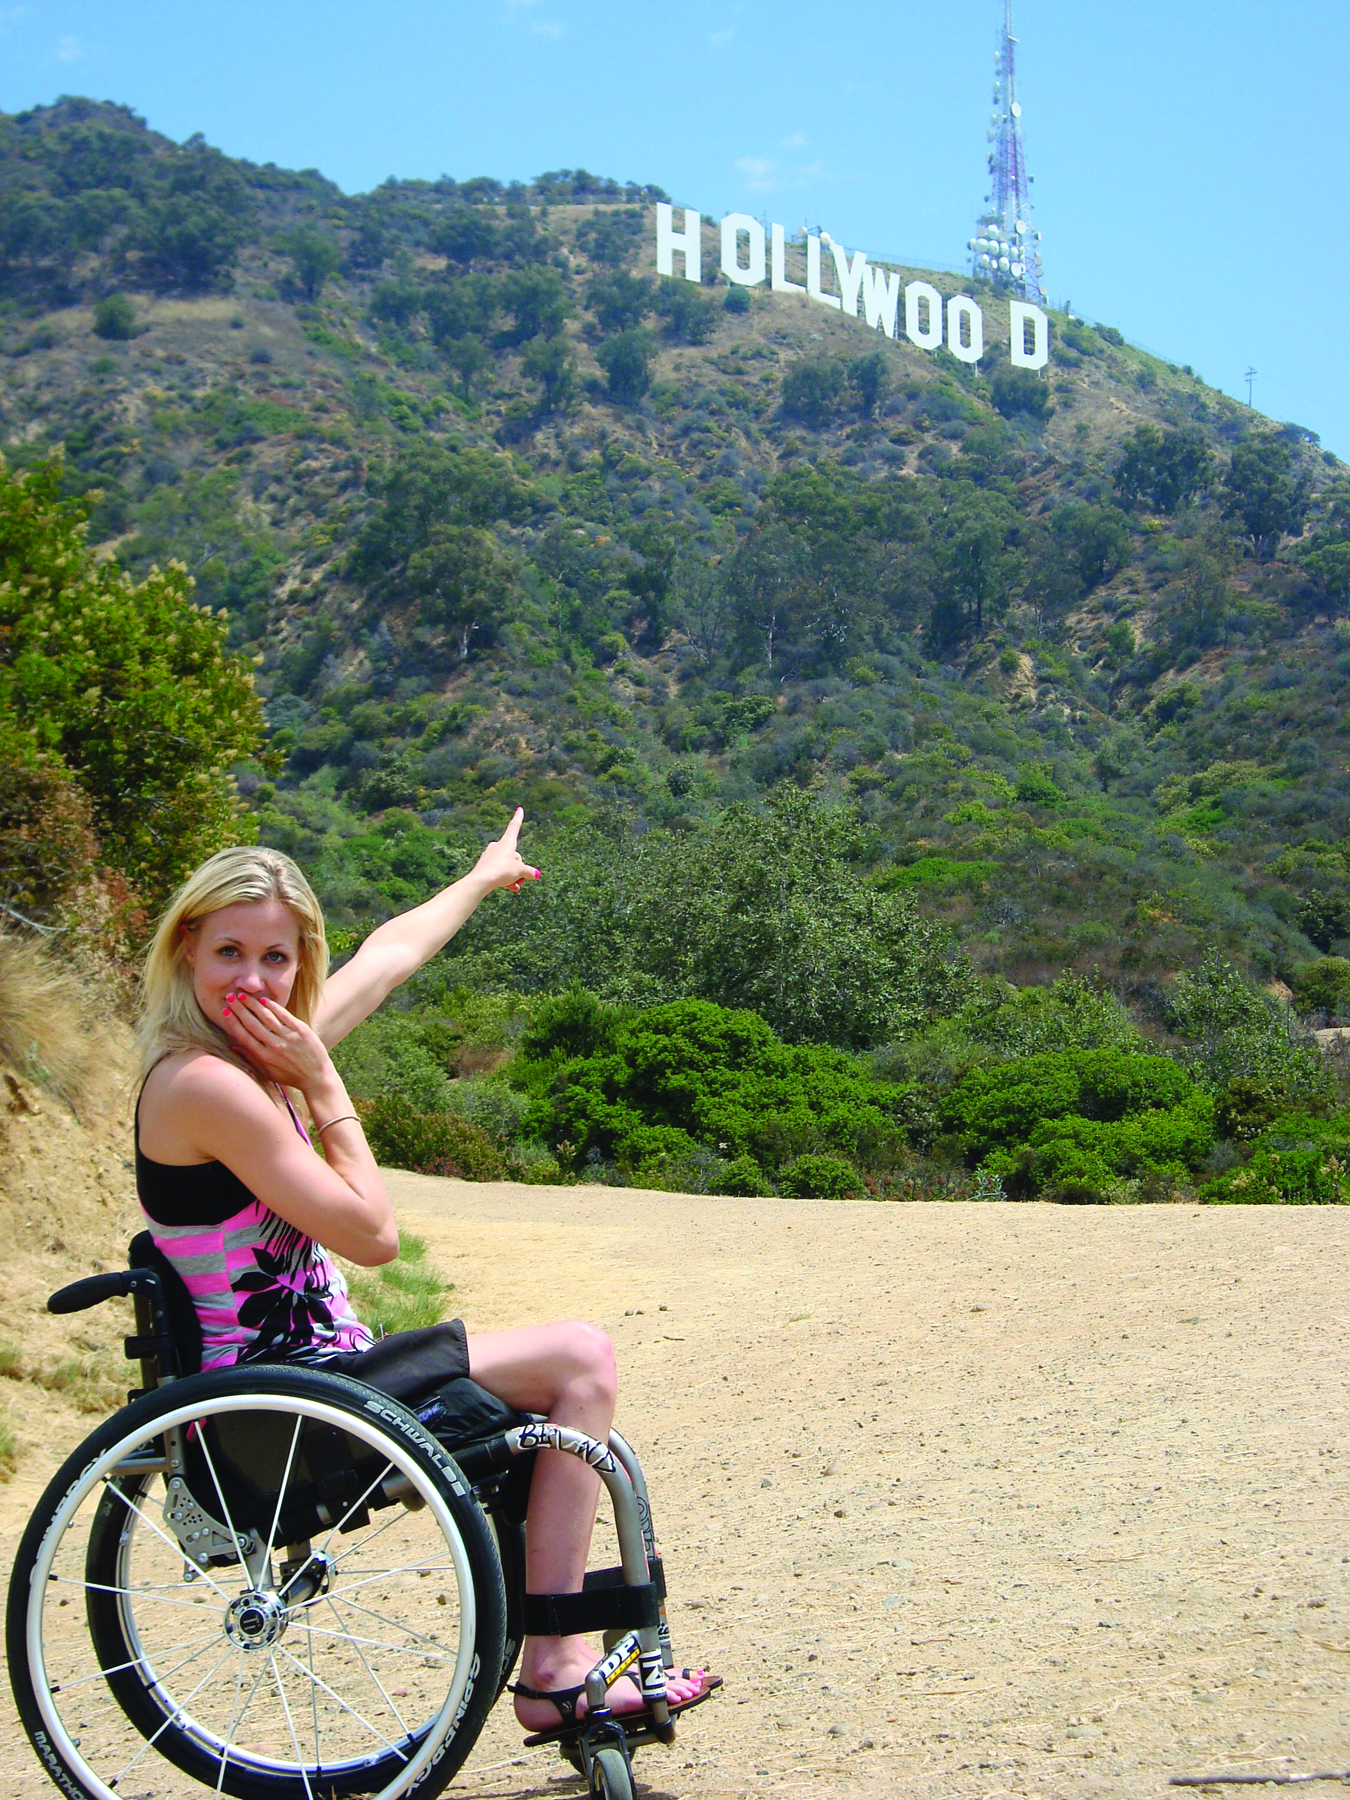 Christi Rougoor points to the Hollywood sign during her first trip to California.